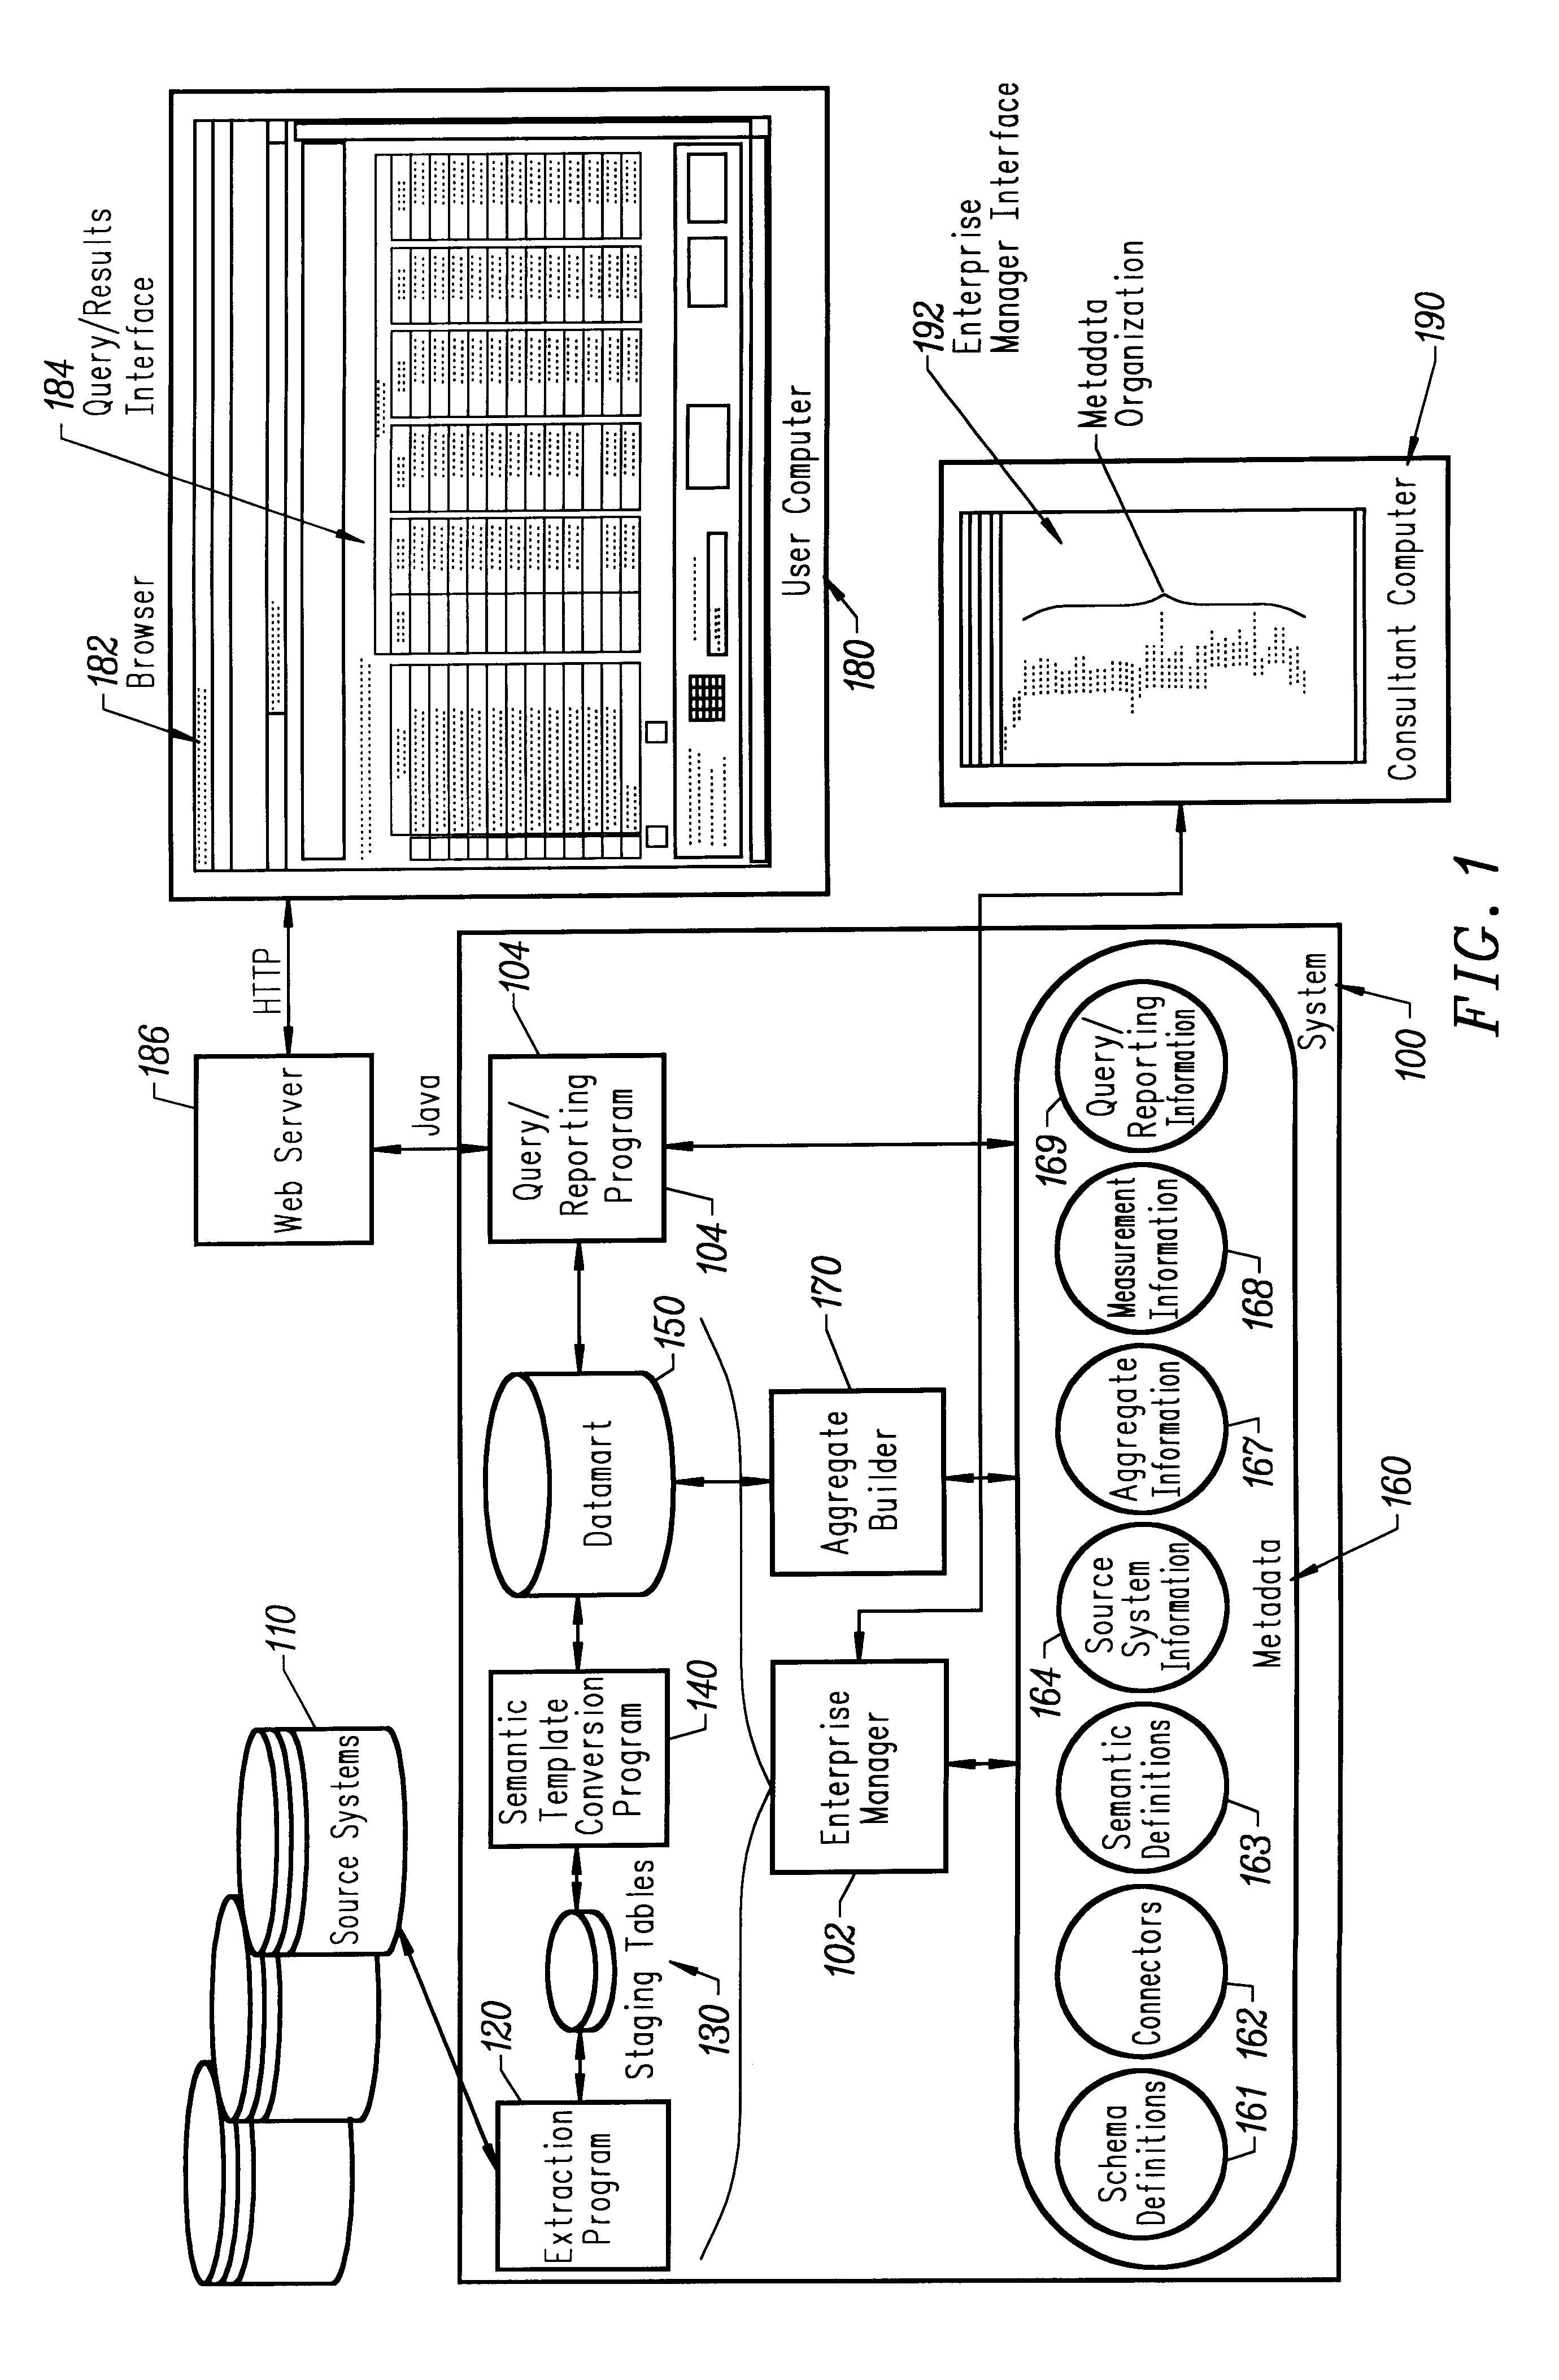 Method and apparatus for creating a datamart and for creating a query structure for the datamart